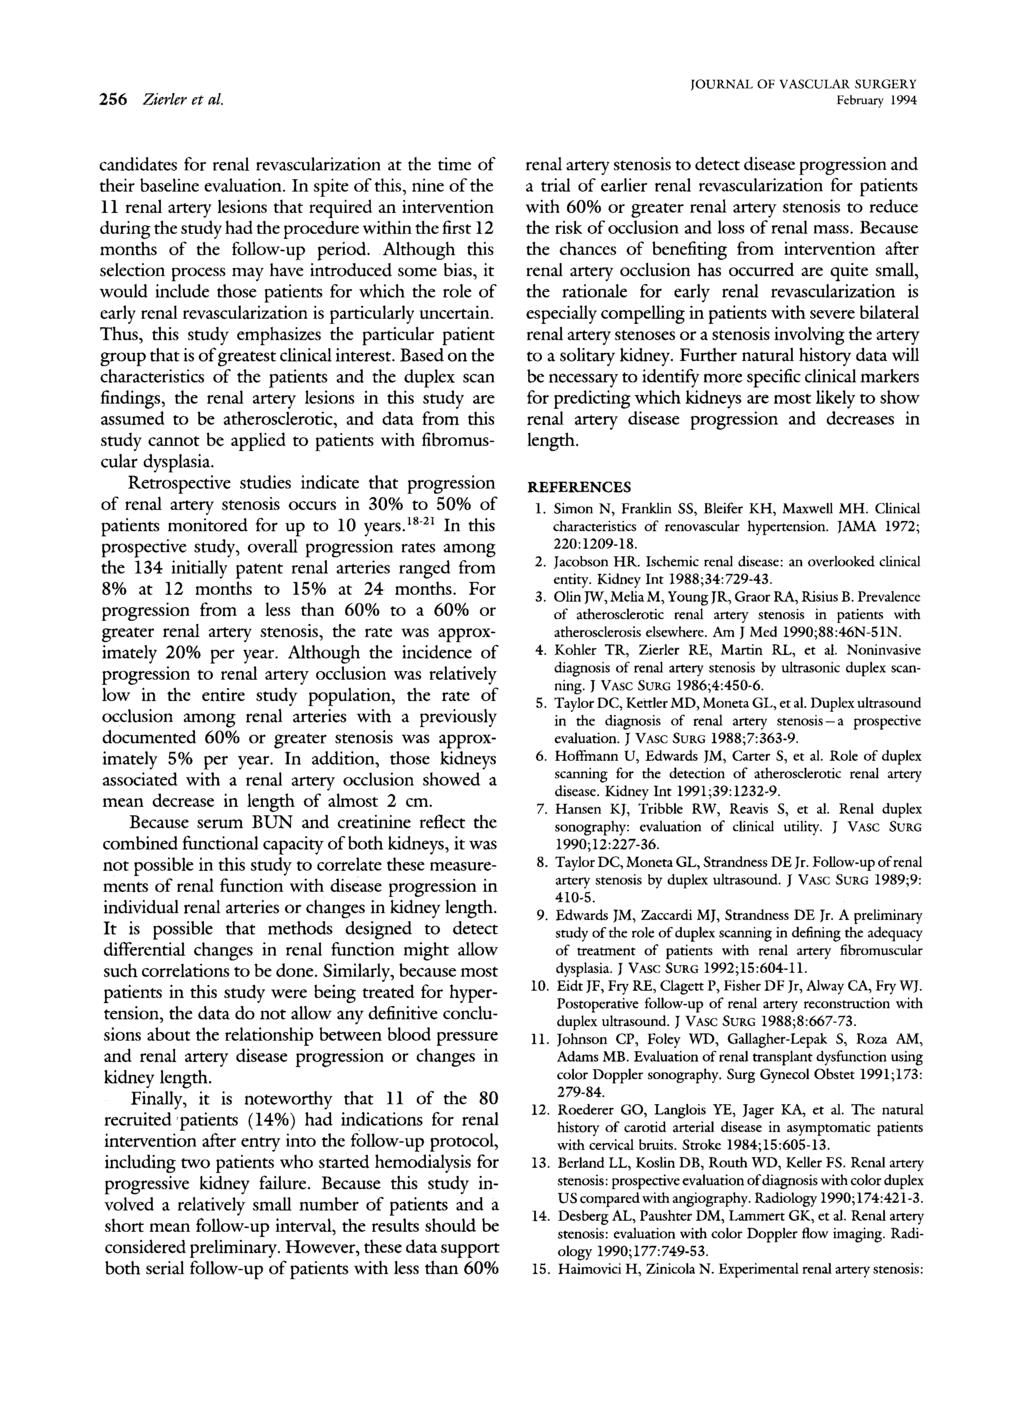 256 Zierler et at. JOURNAL OF VASCULAR SURGERY February 1994 candidates for renal revascularization at the time of their baseline evaluation.